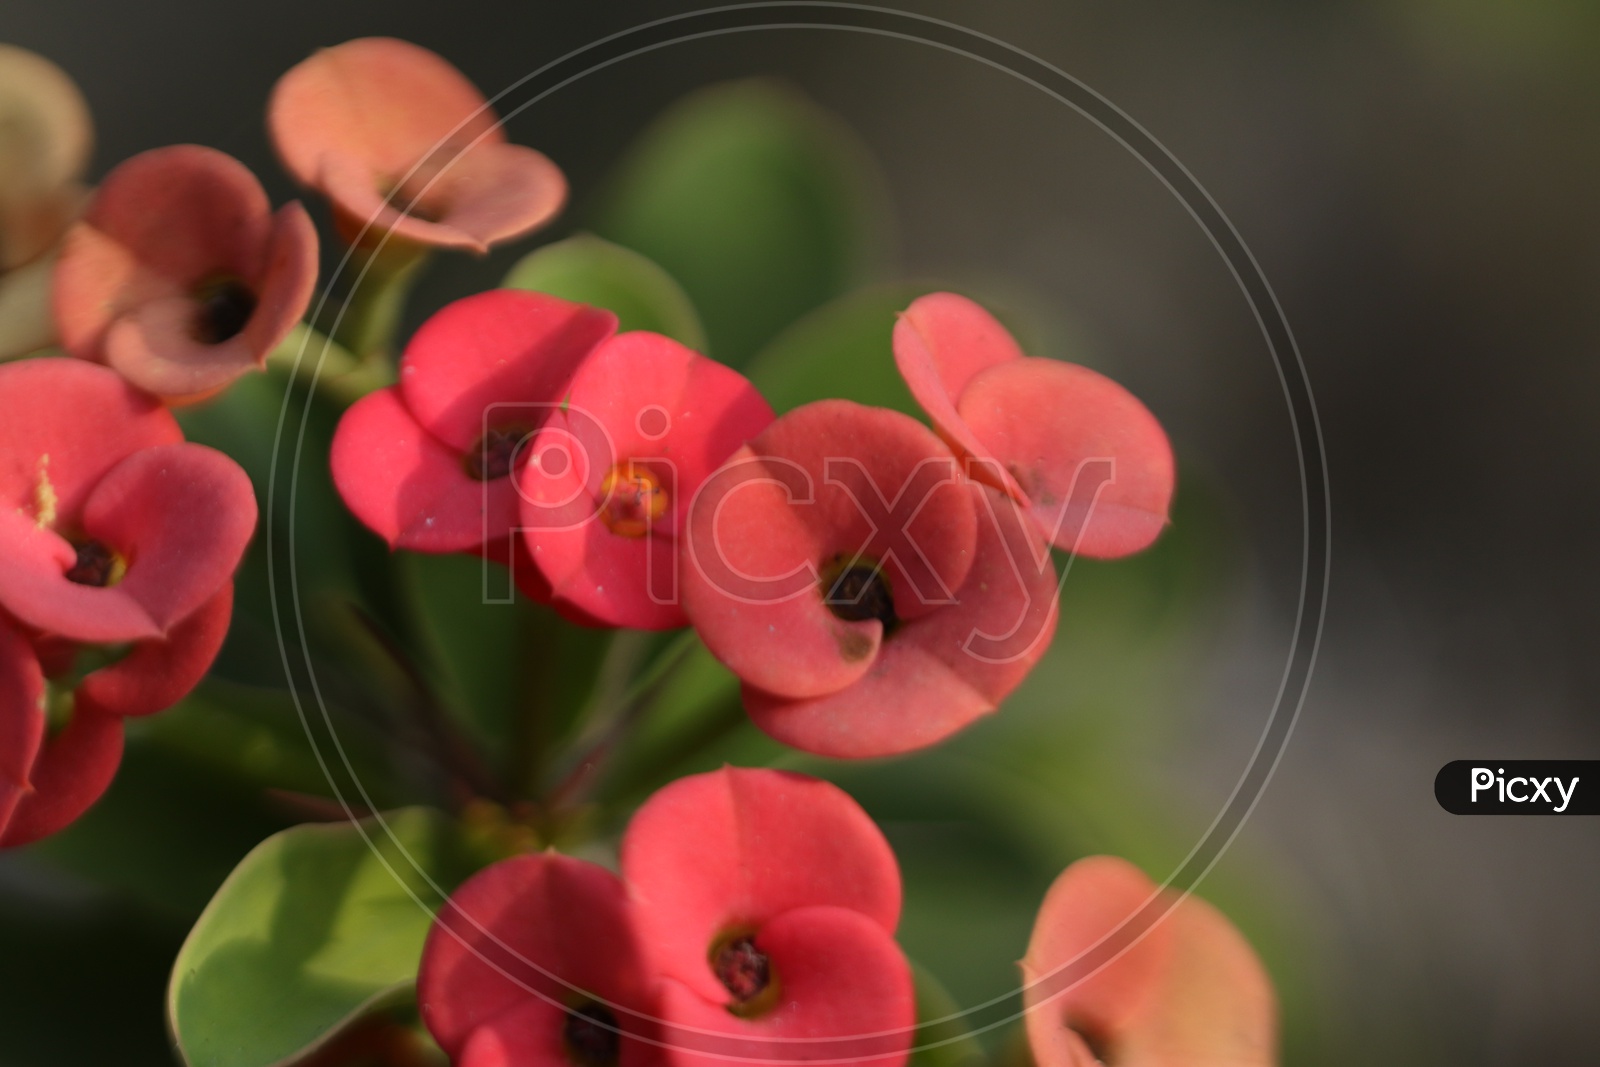 Close up shot of Red flowers